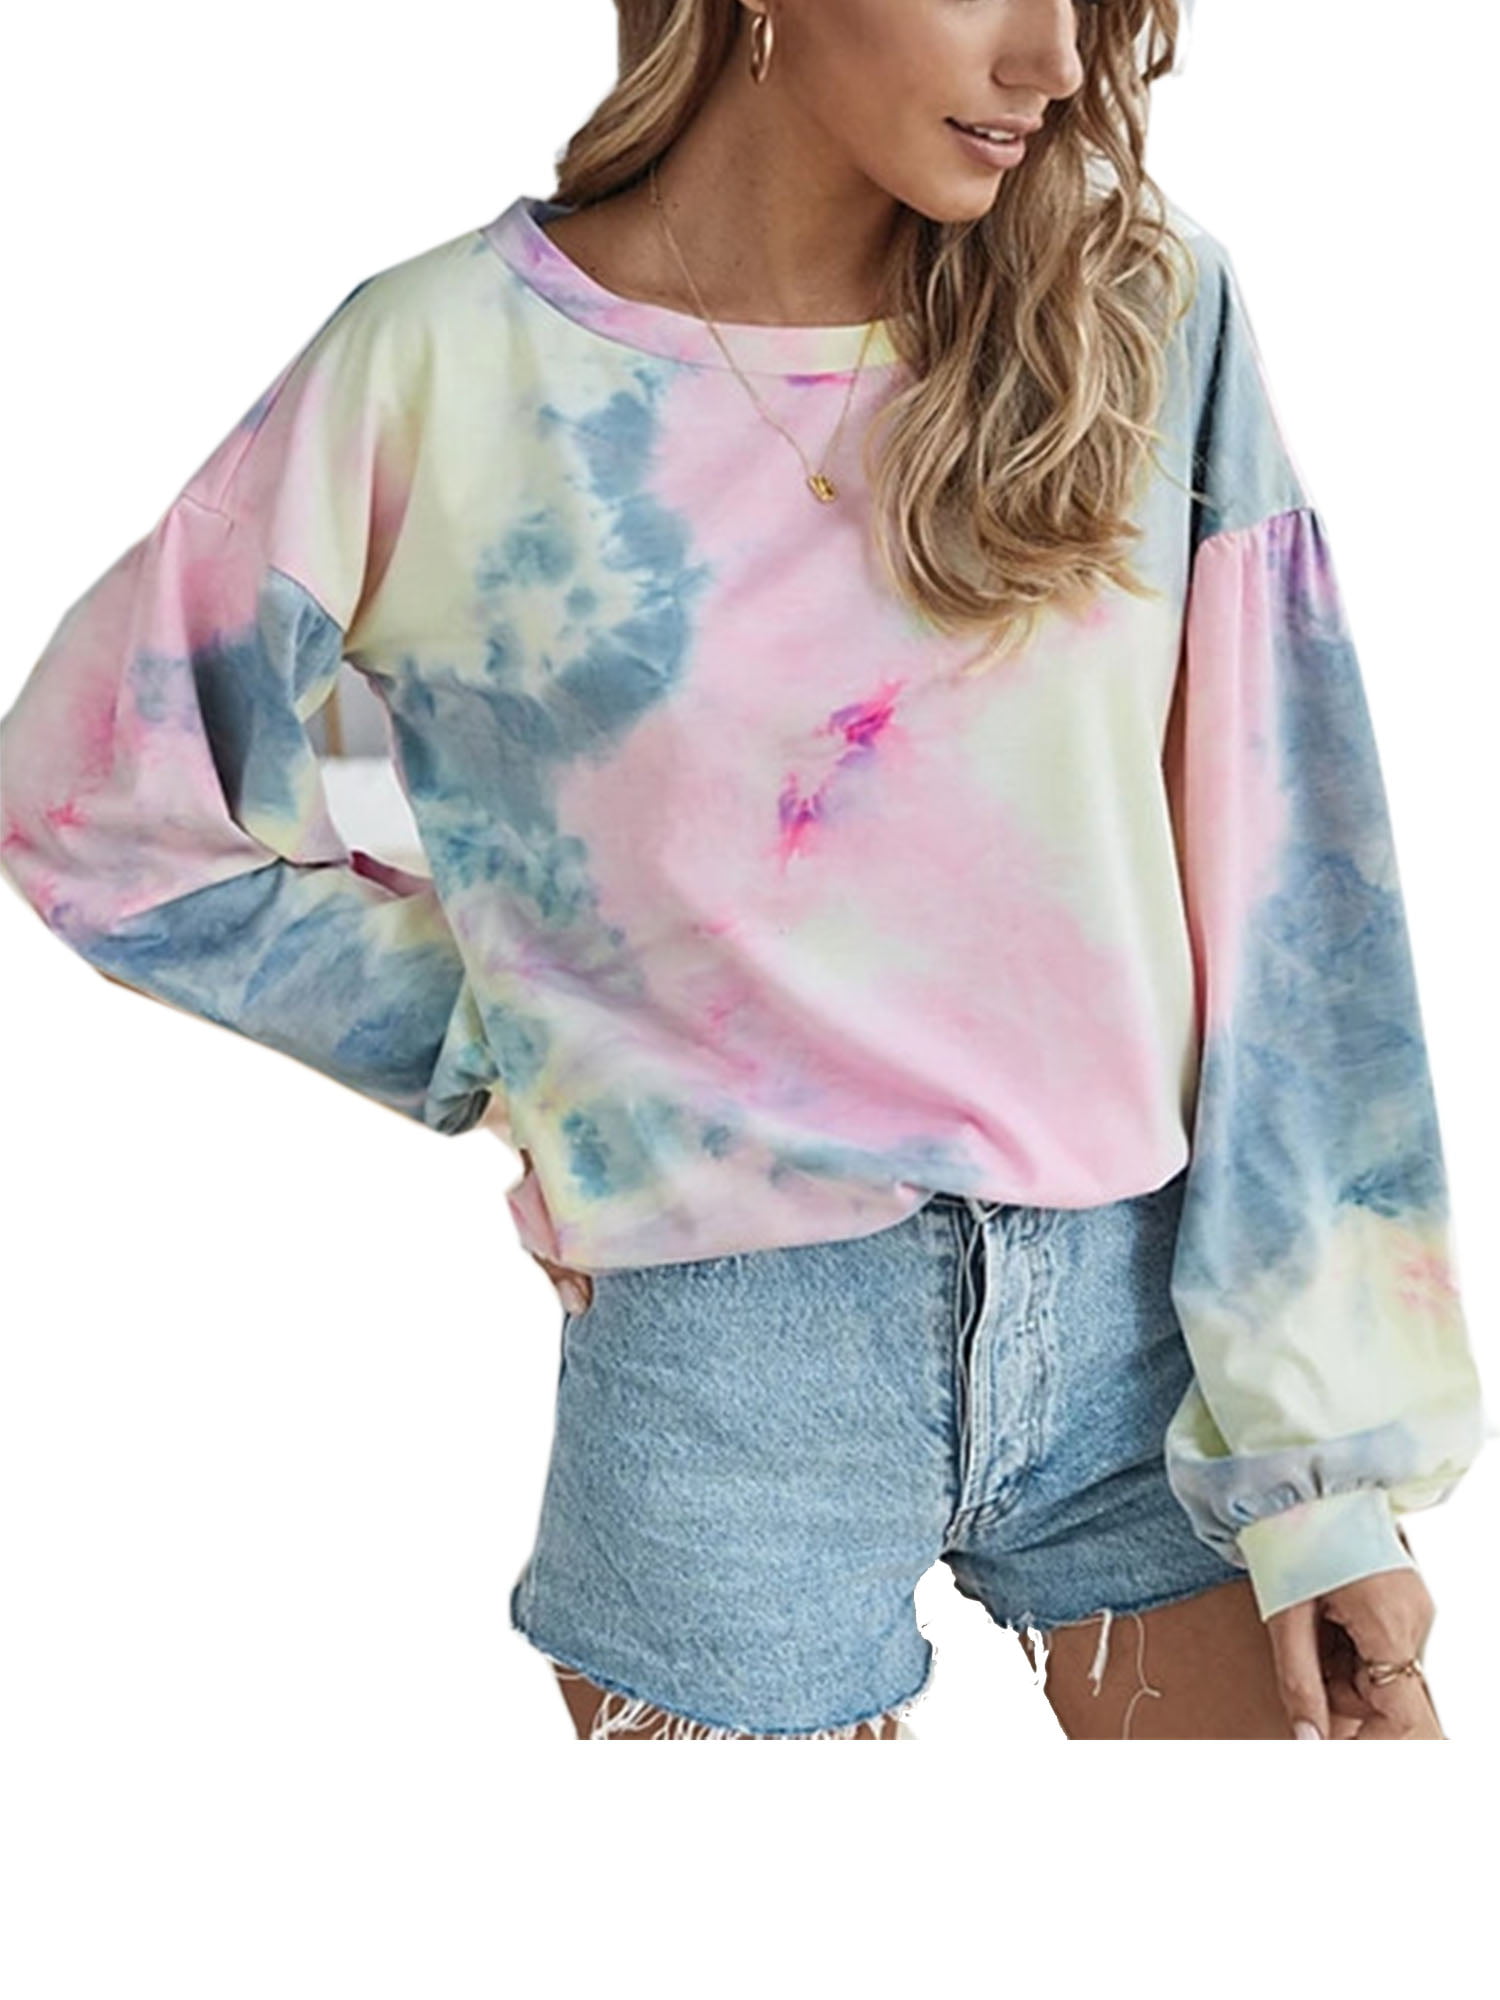 ZBYY Pullover for Women Tie Dye Print Sweatshirt Round Neck Casual Long Sleeve Loose Tops Shirts Fashion Blouses